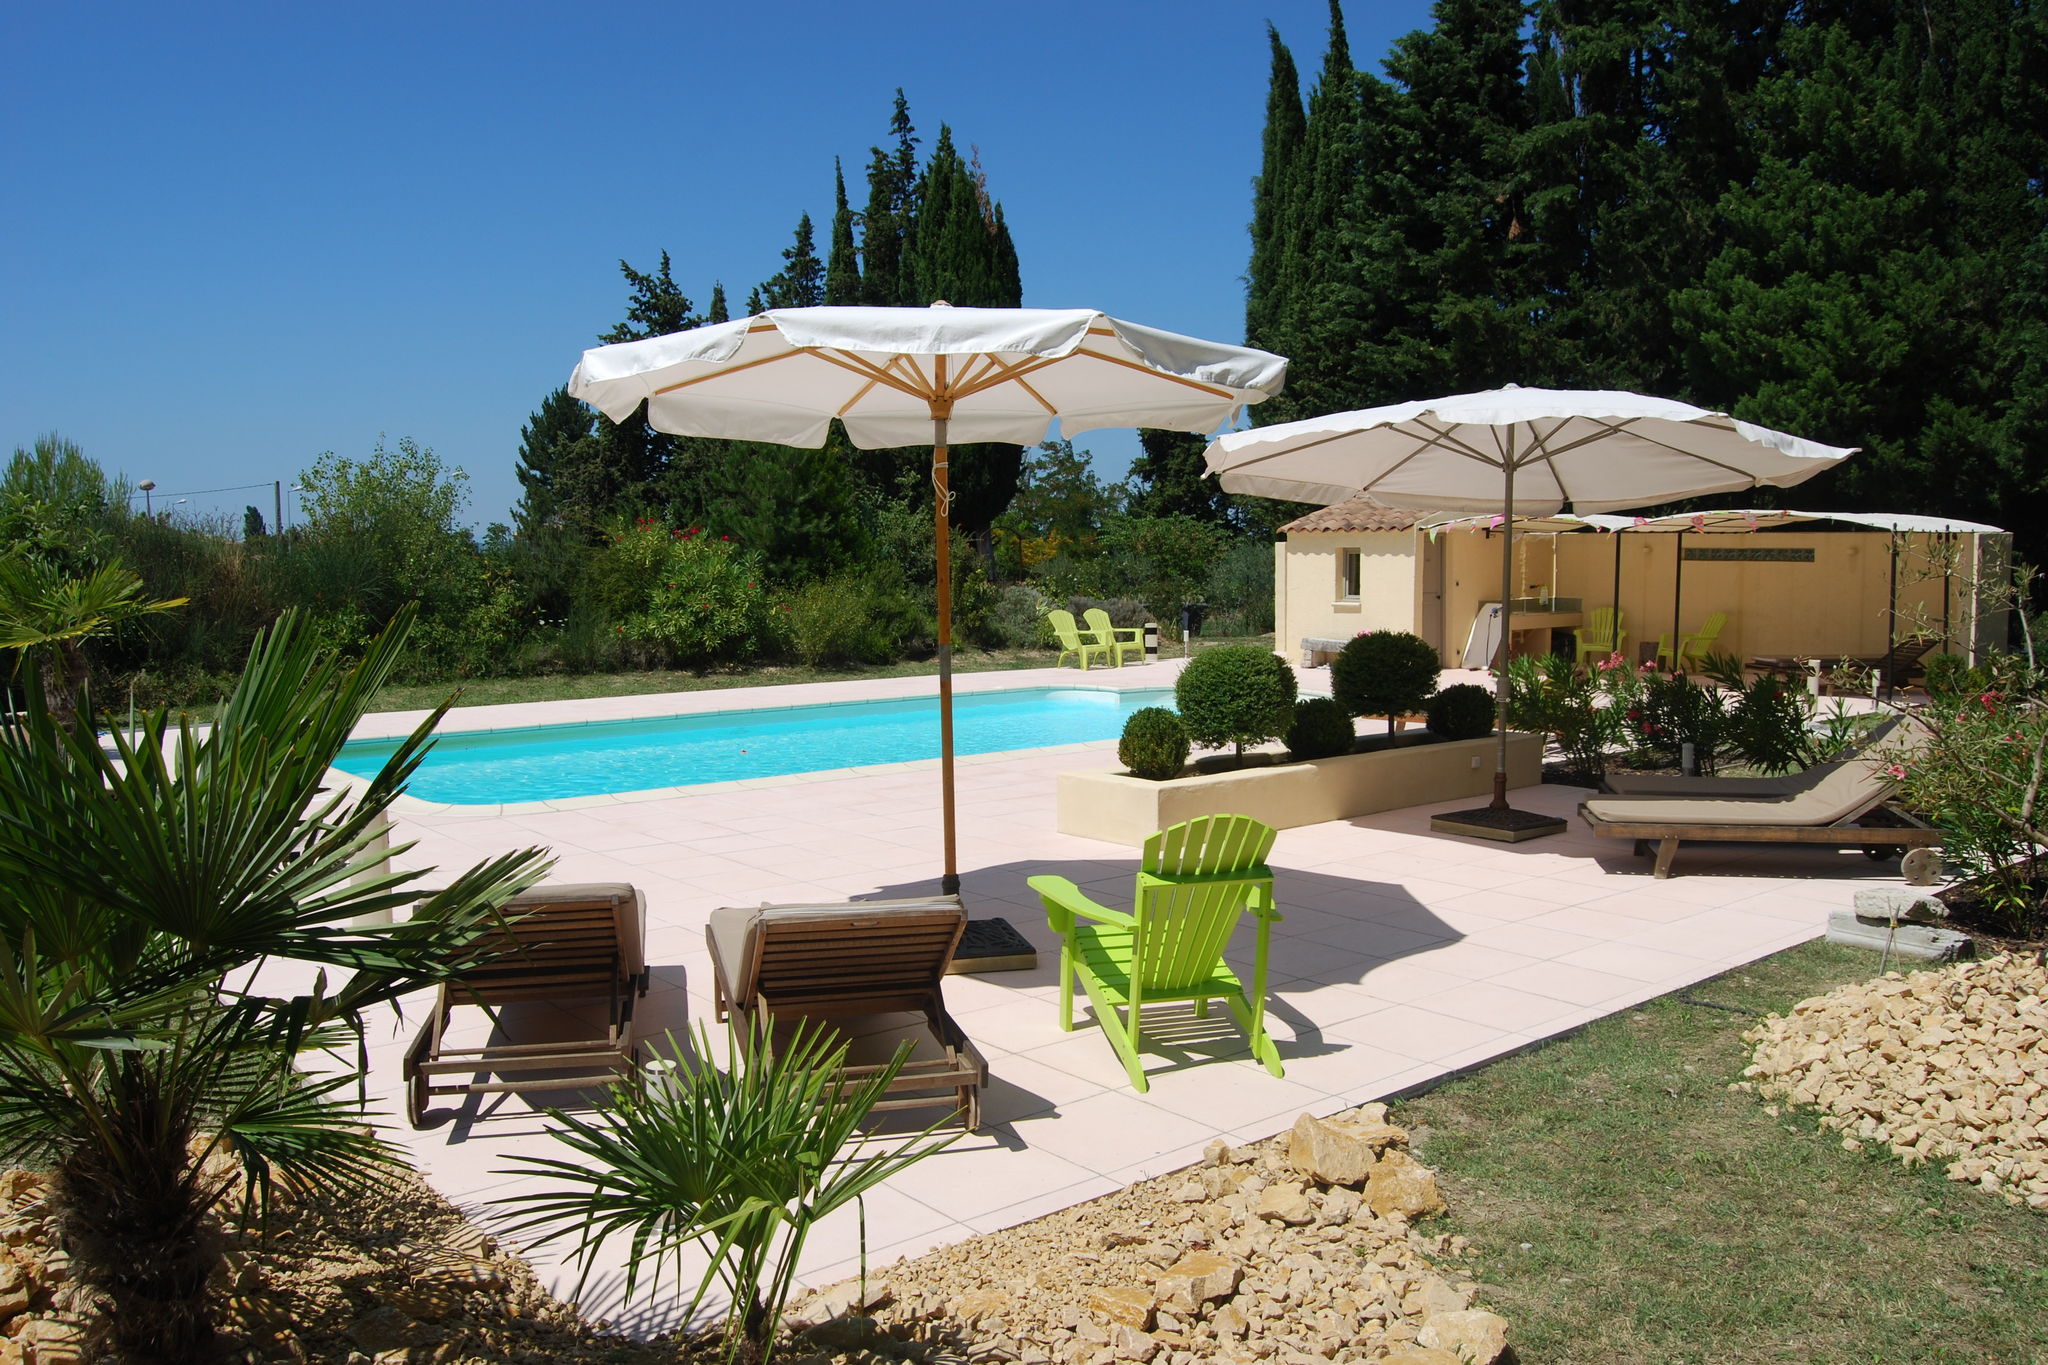 Gîte with friends room in stately villa with pool and parkgarden